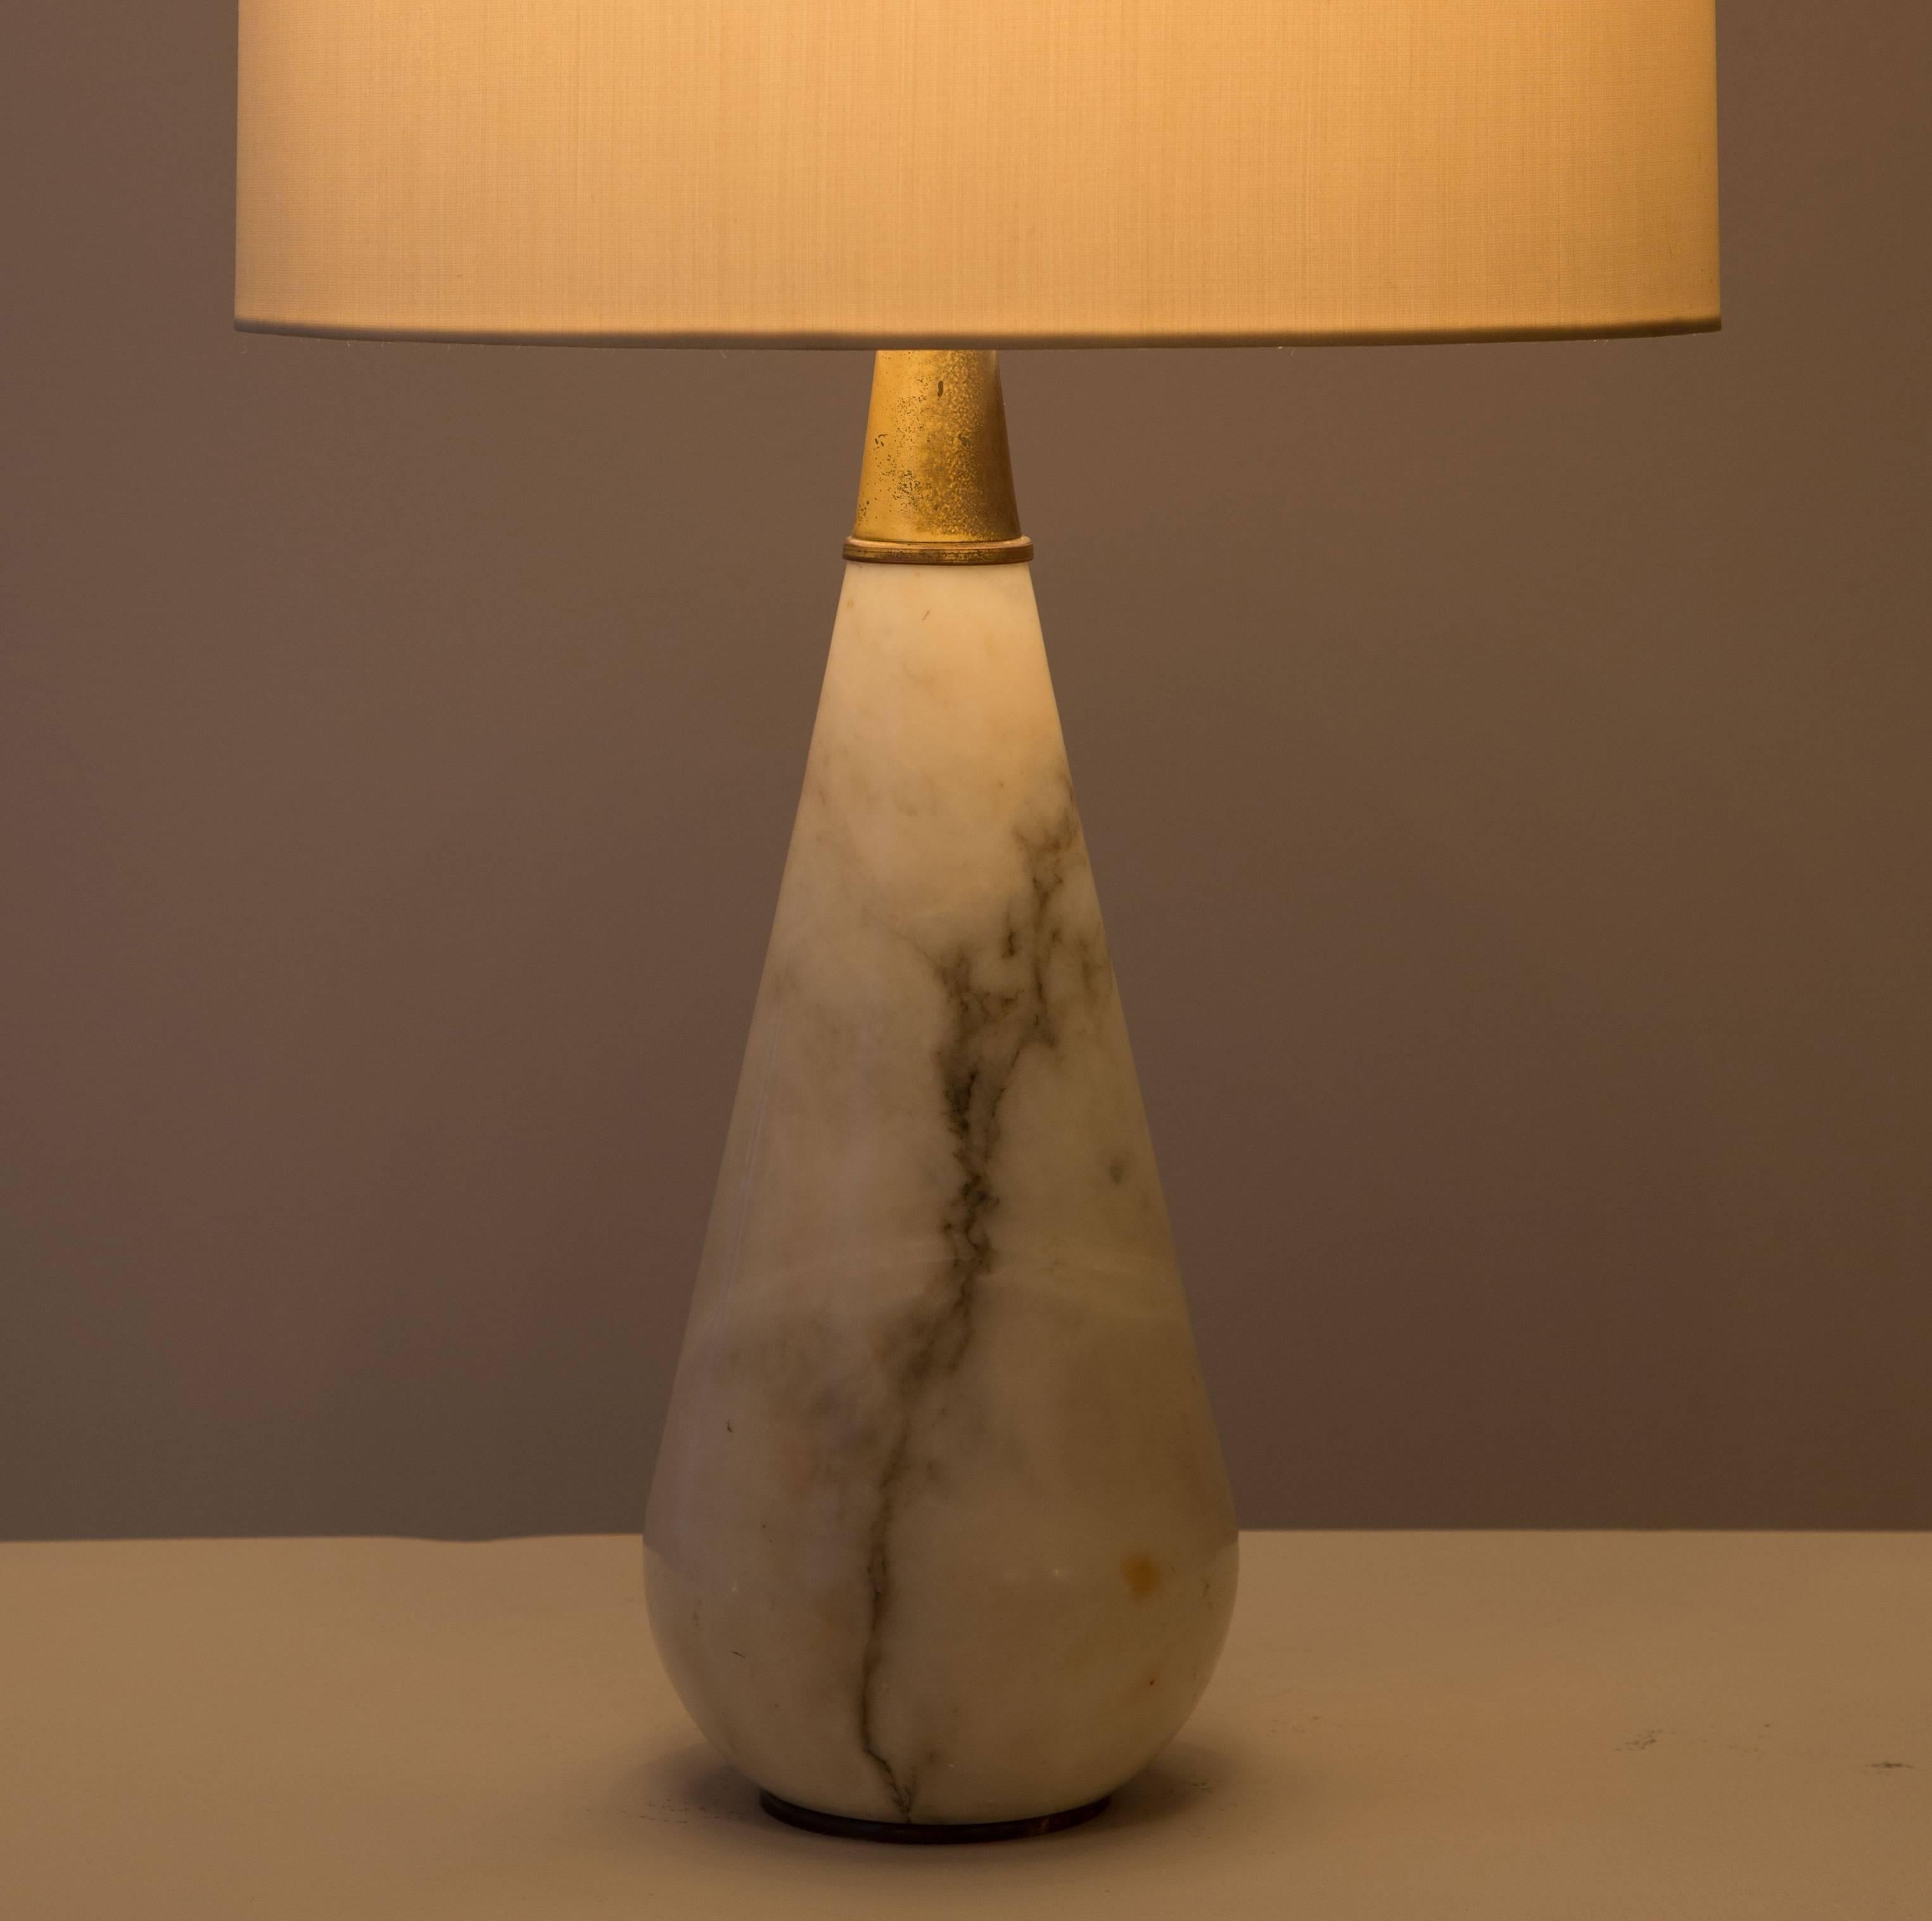 Pair of Italian Carrara marble table lamps made in Italy in the 1950s. Brass hardware. Original cords. Shades not included. Each light takes an E27 75W maximum bulb.